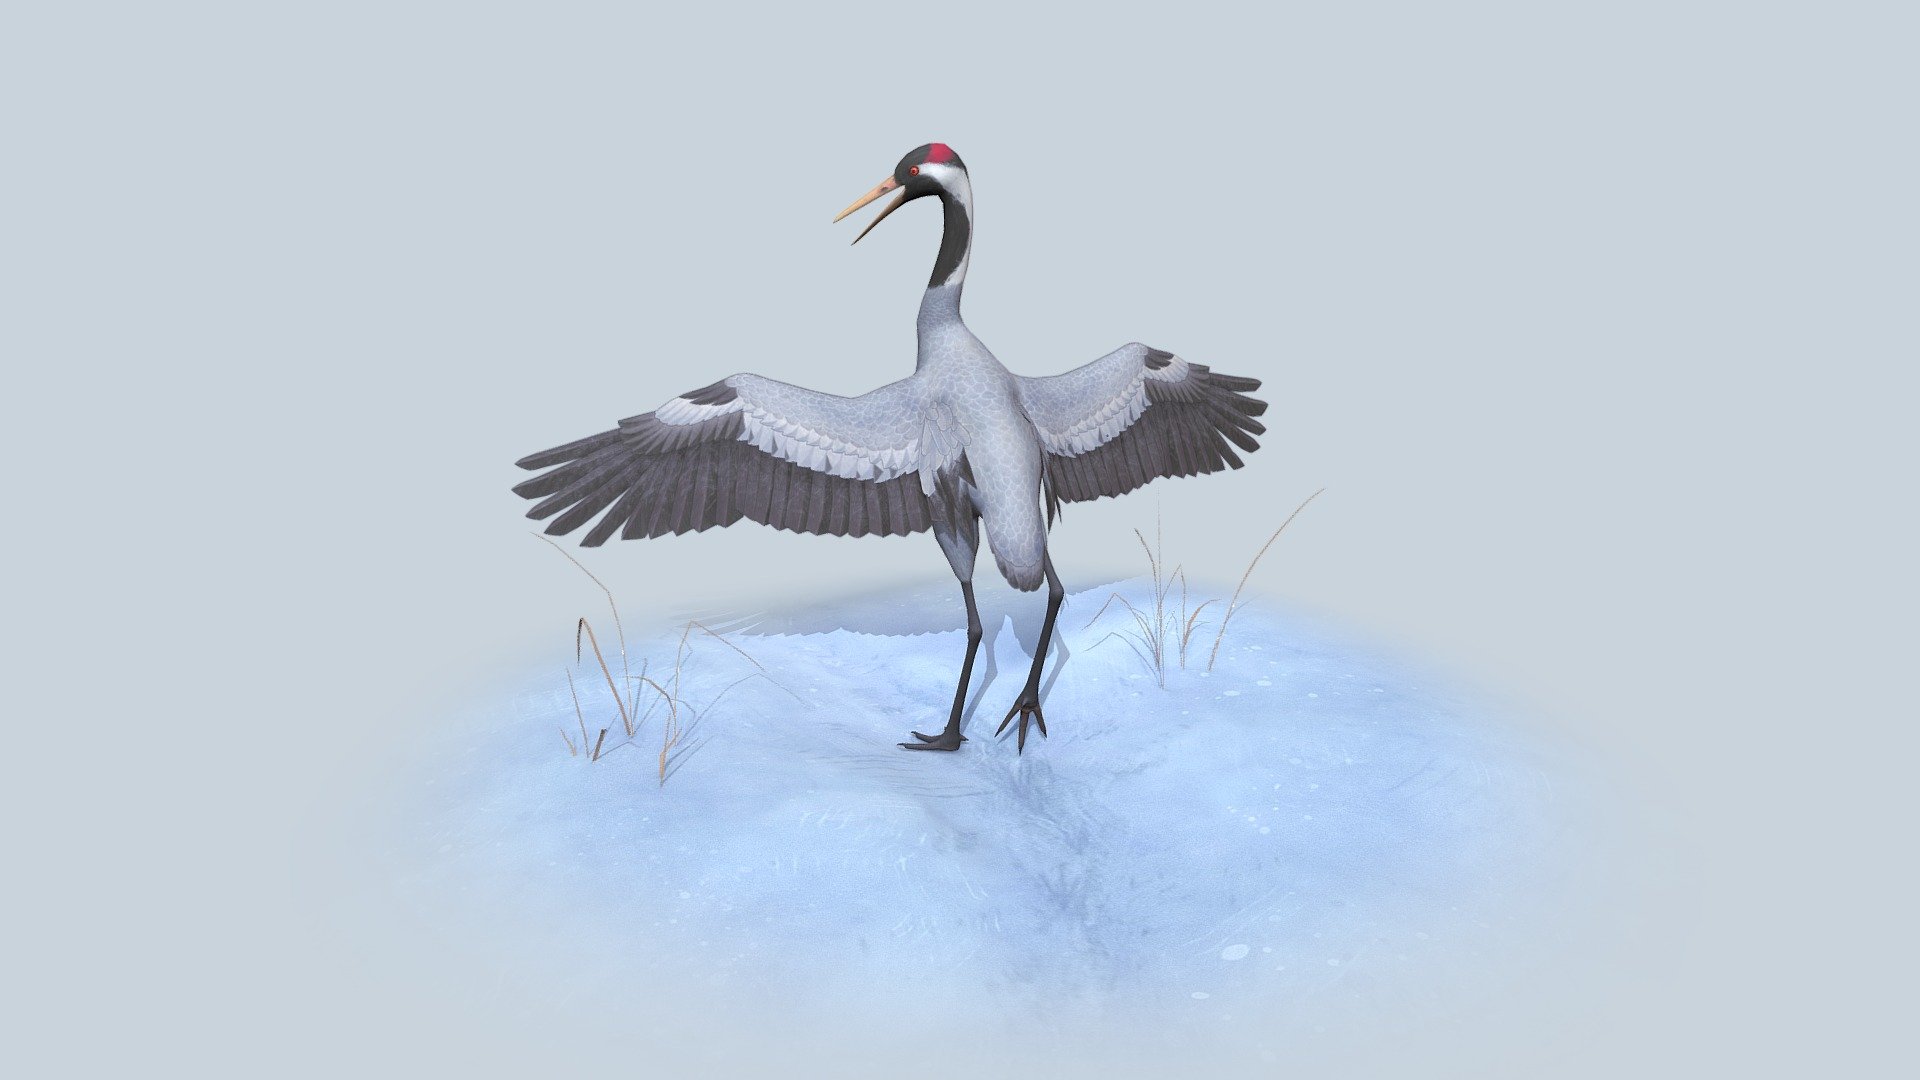 Stylized eurasian crane 
Everything from scratch made by me

You can check more pictures at my Artstation https://www.artstation.com/artwork/kDJekz
My Artstation: https://www.artstation.com/kaigonathus
My Instagram: https://www.instagram.com/kaigonathus/ - Eurasian Crane - 3D model by kaigonathus / Iida-Maria Pennala (@kaigonathus) 3d model